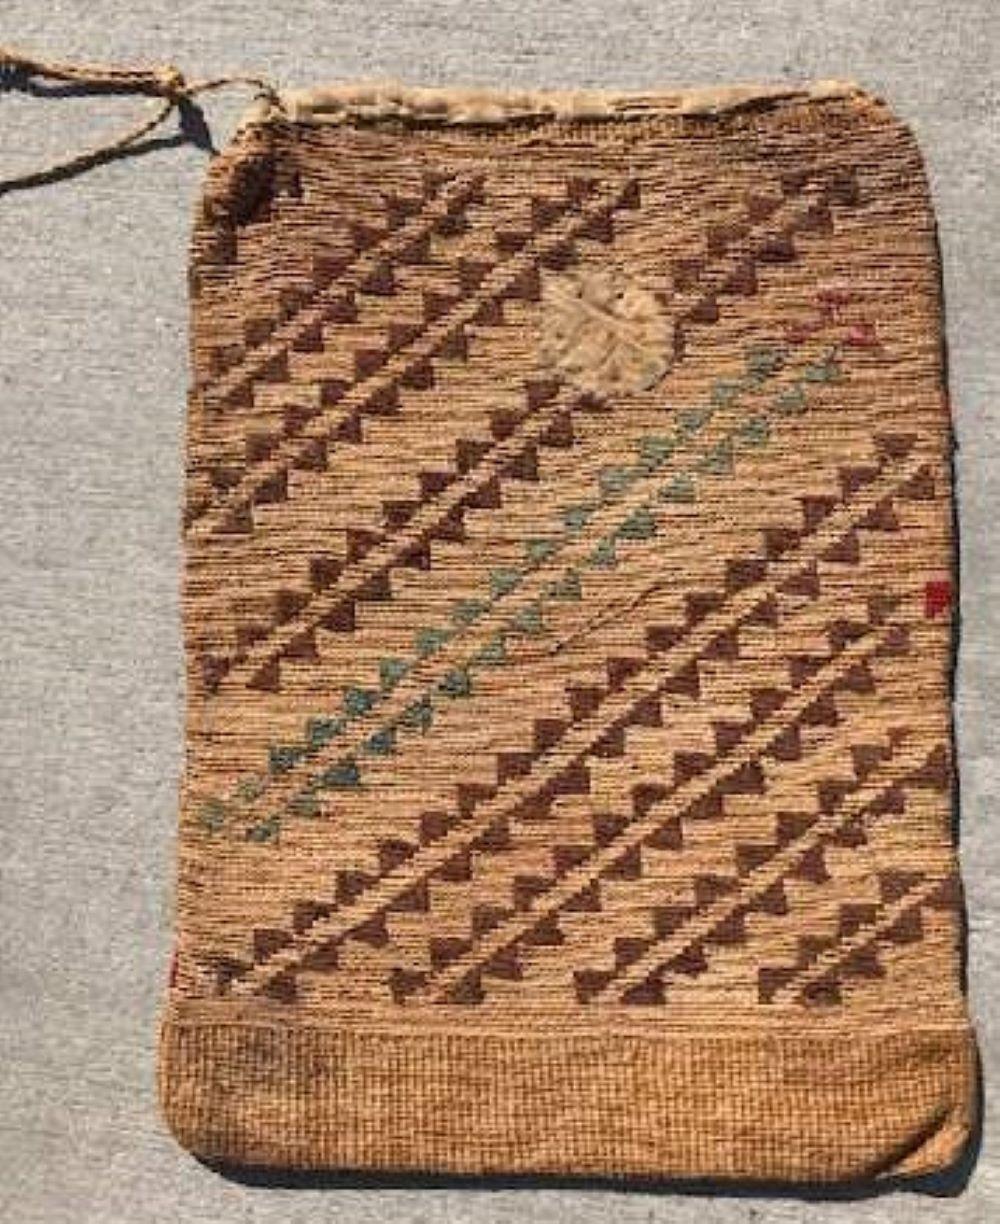 This very fine exceptional early 19th century native American Indian corn husk plateau bag. Fine condition with a fantastic patch repair on one side.